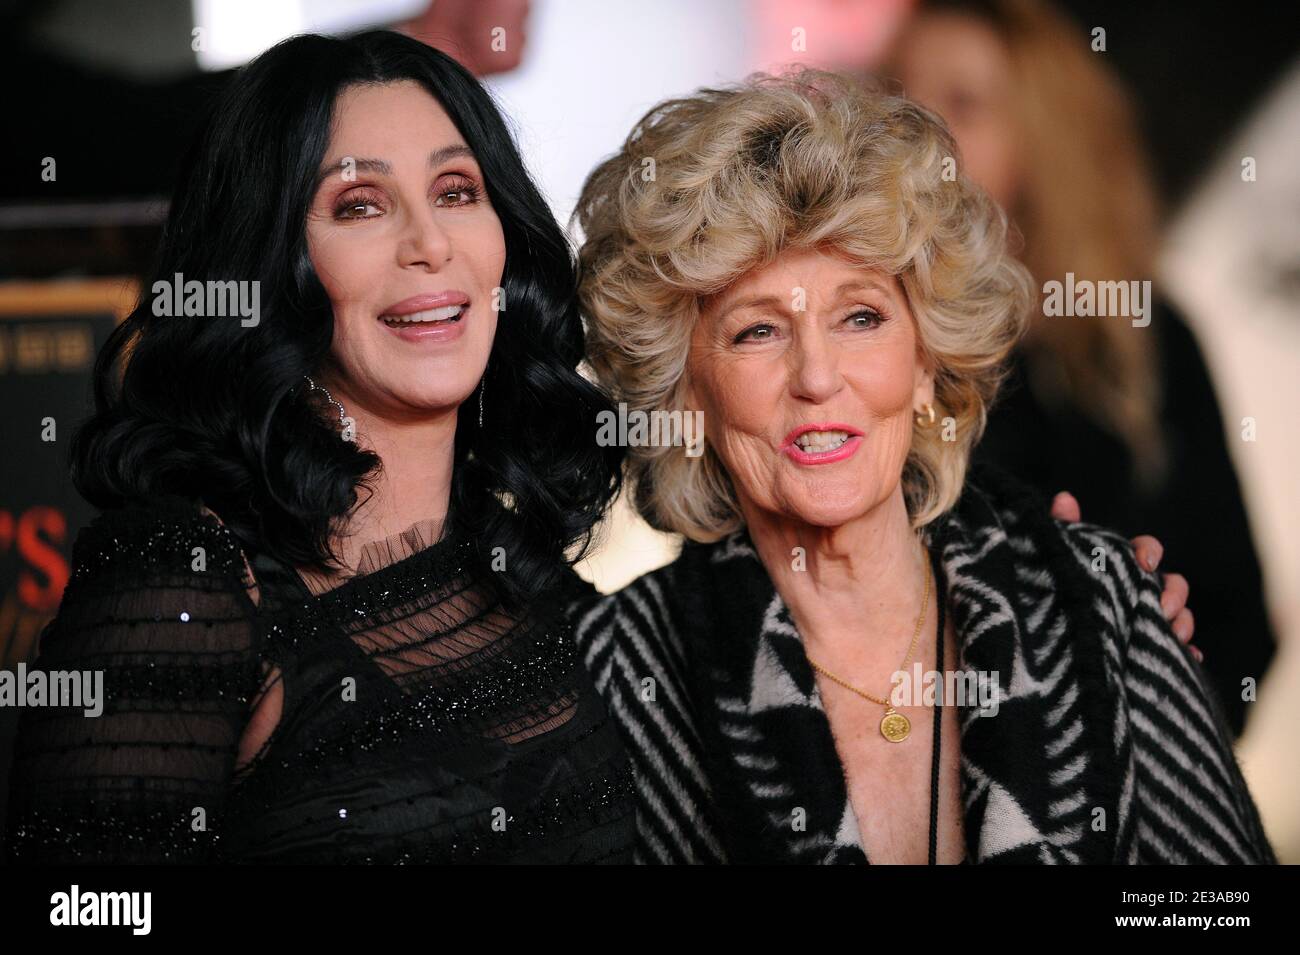 Cher, here with her mother Georgia Holt, is honored with a hand and footprint ceremony at Grauman's Chinese Theatre. Los Angeles, CA, USA on November 18, 2010. Photo by Lionel Hahn/ABACAPRESS.COM Stock Photo